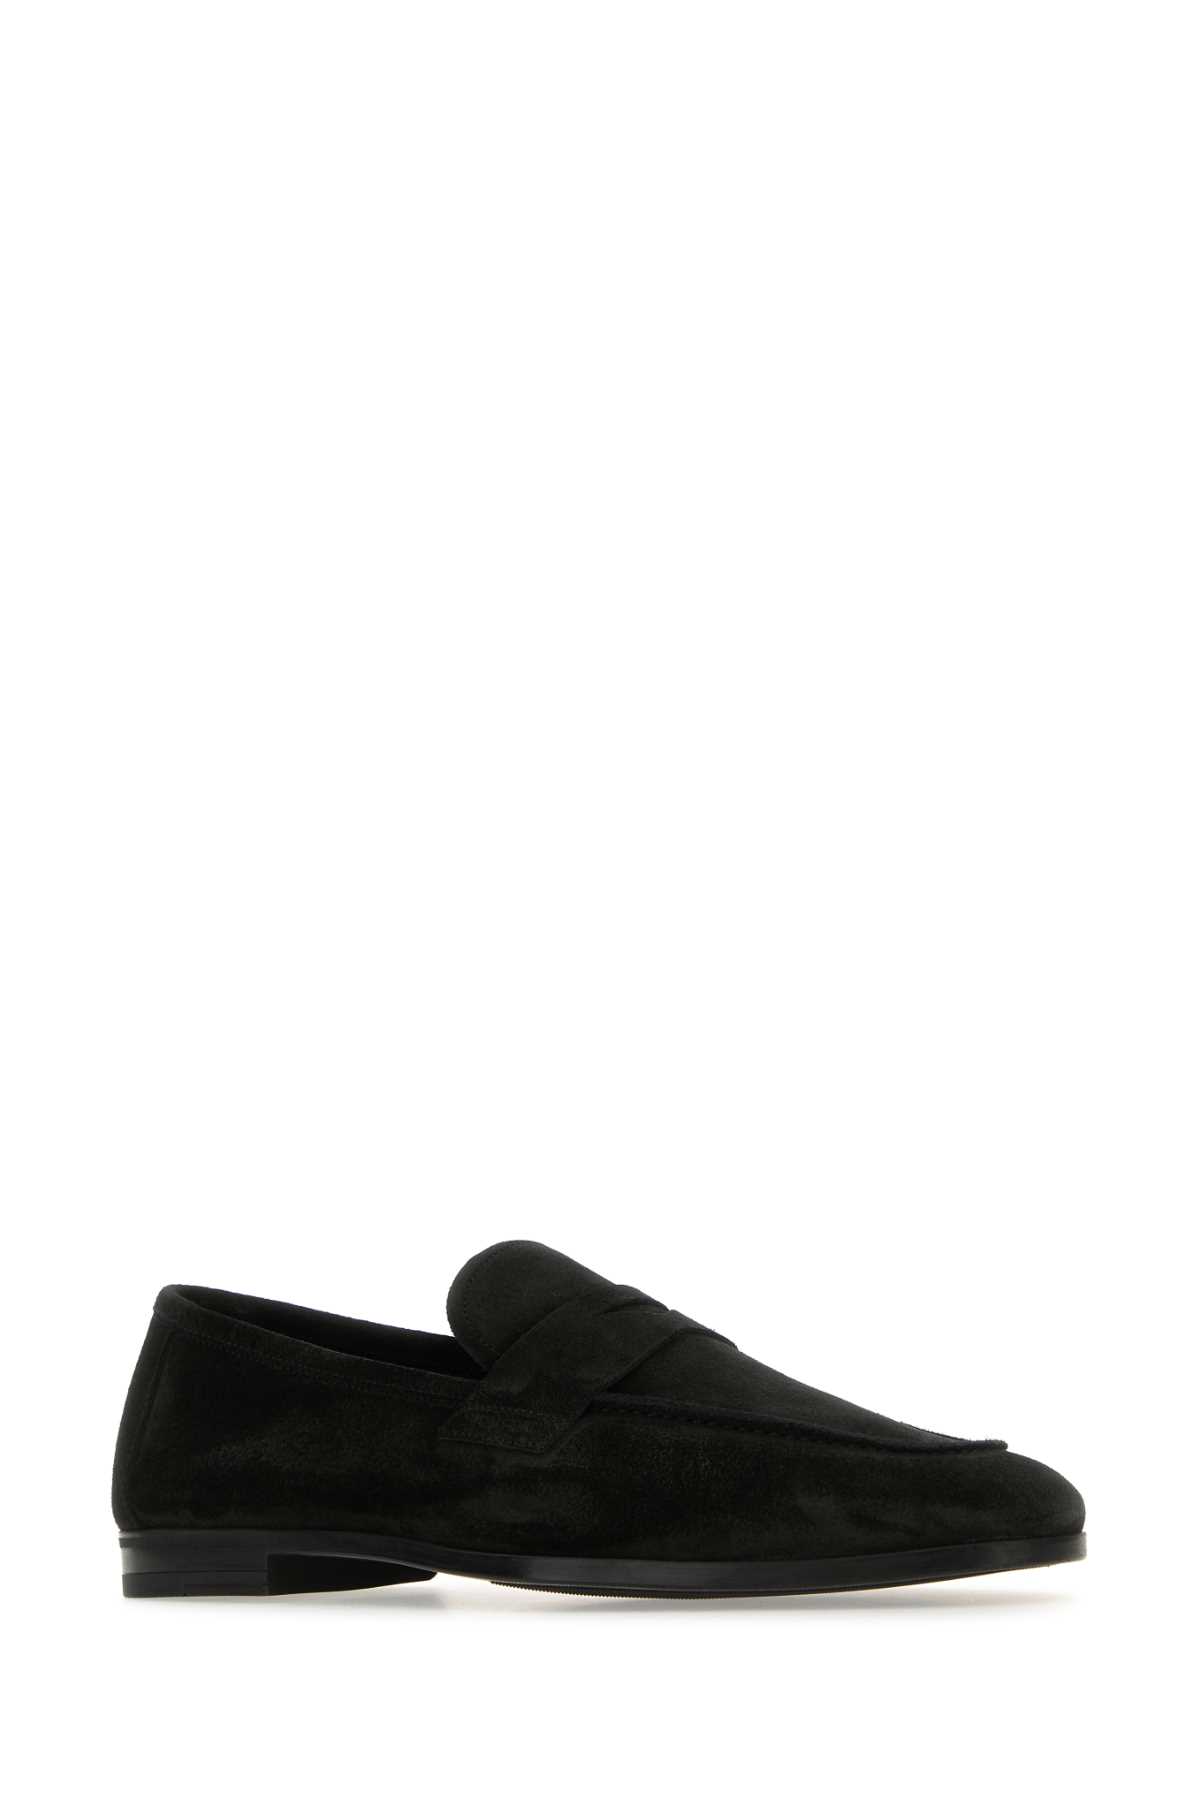 TOM FORD BLACK SUEDE SEAN LOAFERS